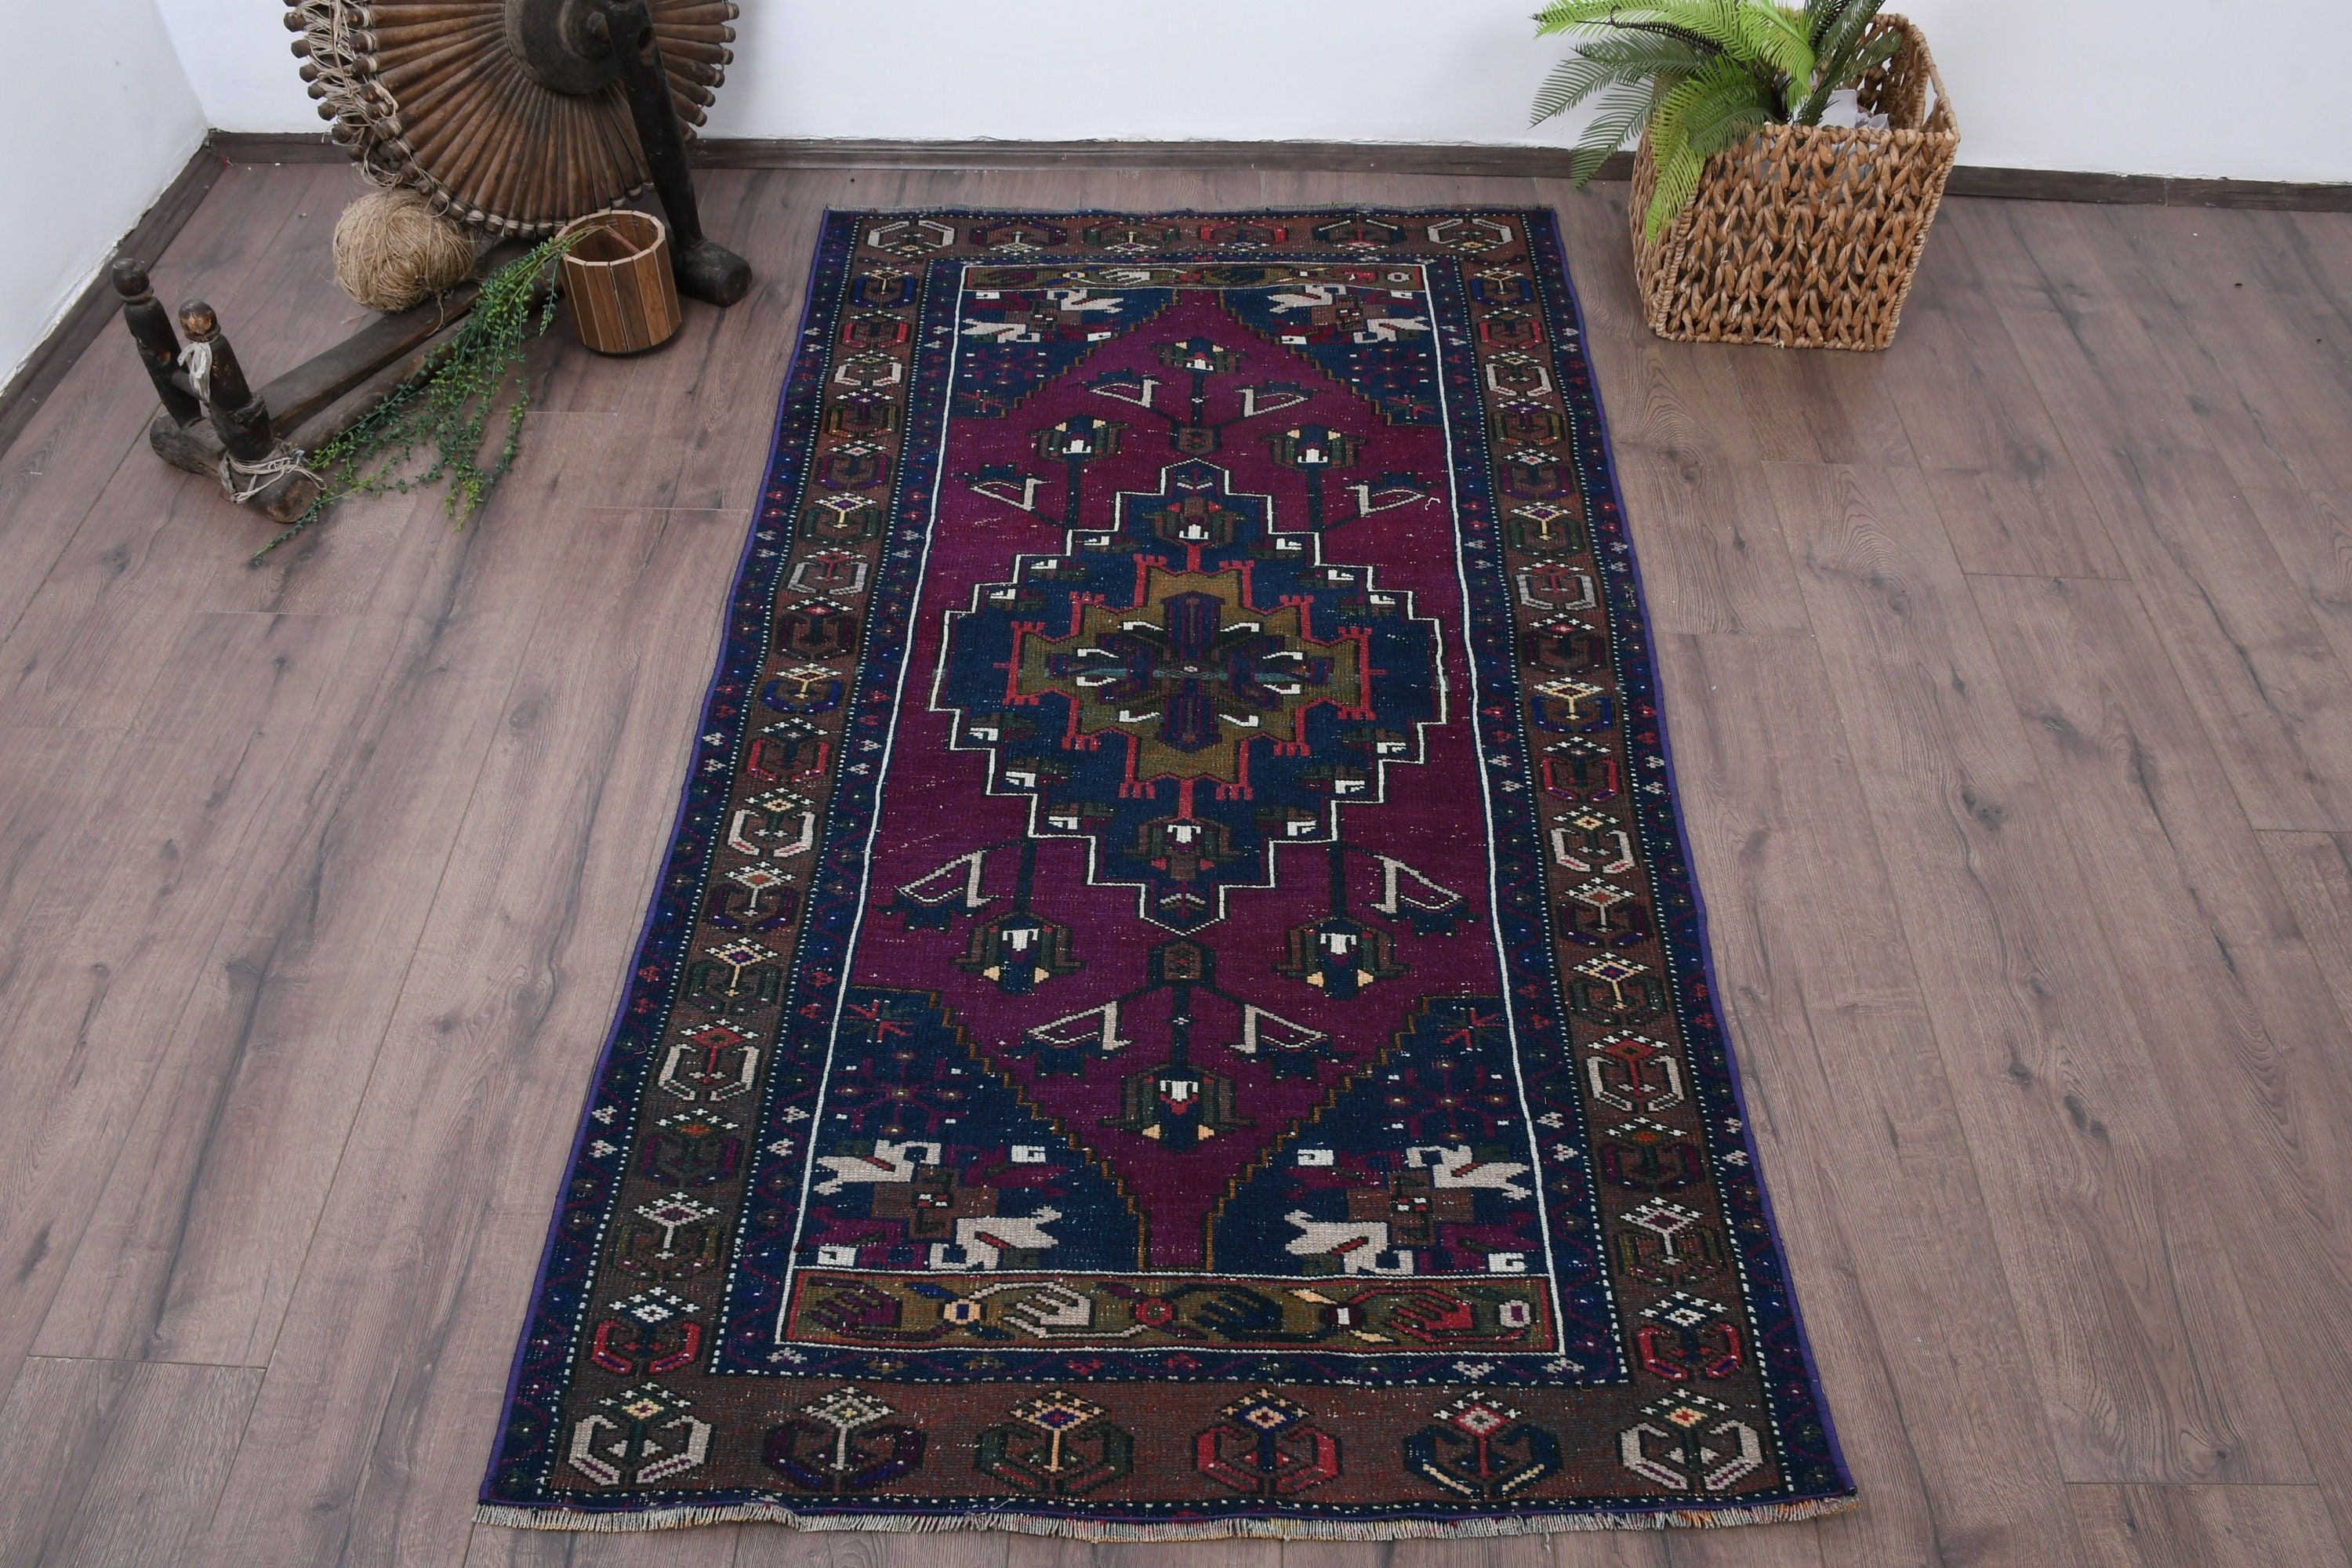 Rugs for Entry, Antique Rug, Kitchen Rugs, Entry Rug, Purple Oushak Rugs, Vintage Rug, Nursery Rugs, 3.2x5.7 ft Accent Rugs, Turkish Rug